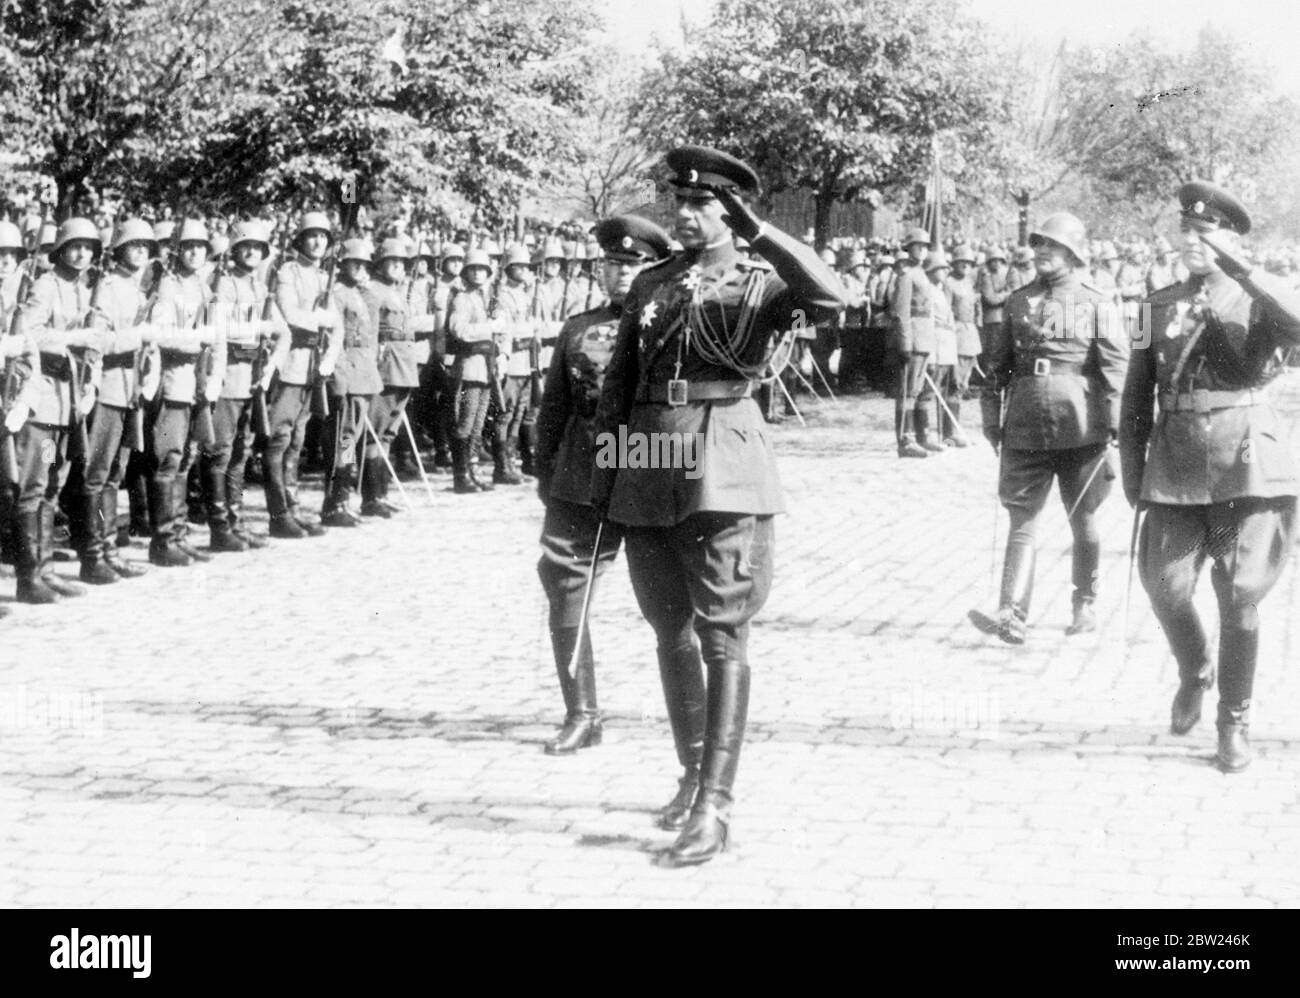 Bulgarian Army Black and White Stock Photos & Images - Alamy